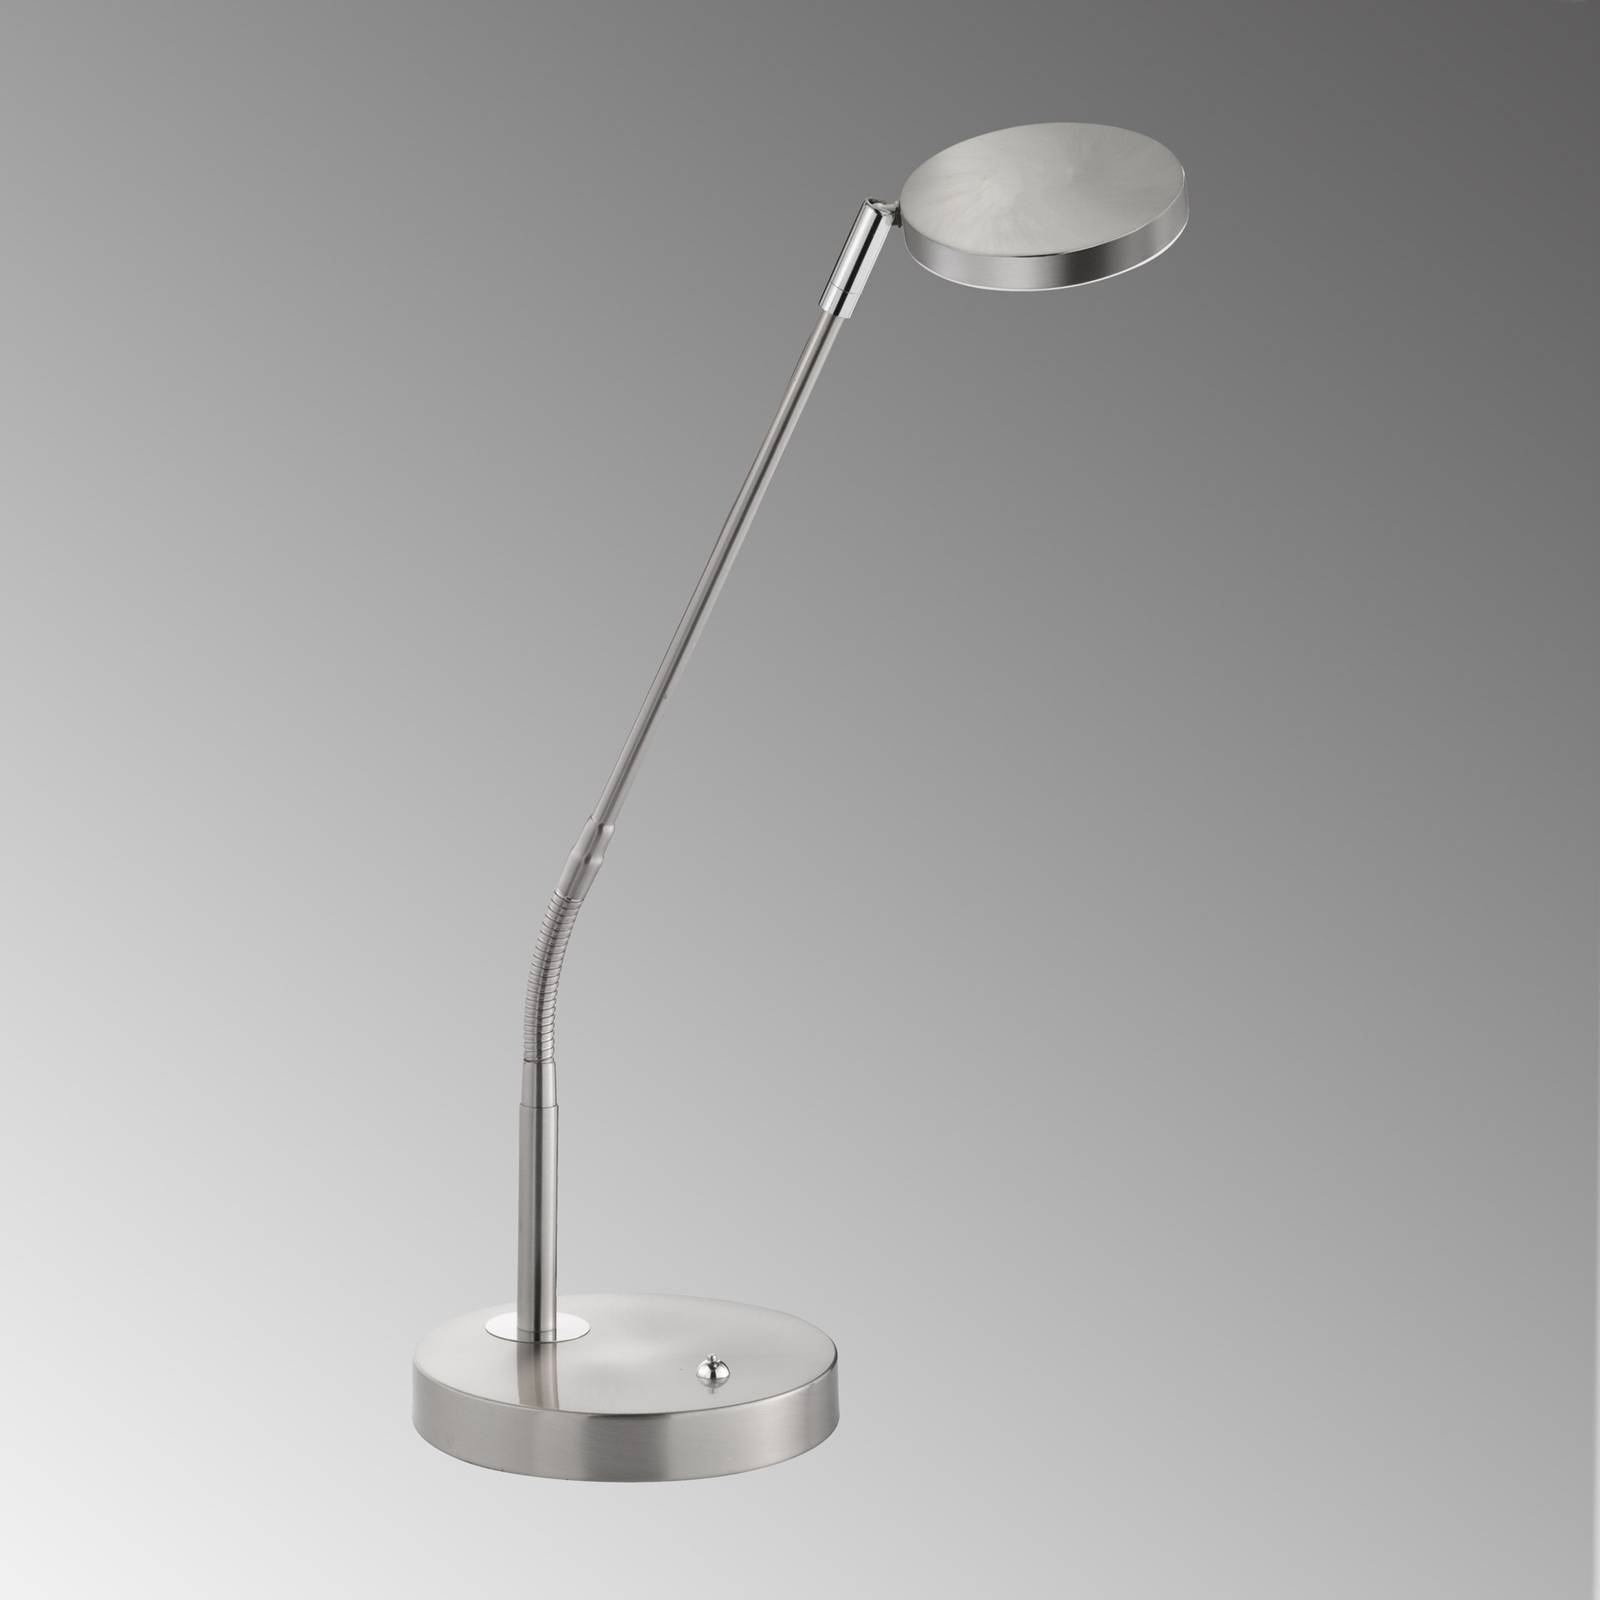 Image of FH Lighting Lampe à poser LED Lunia, dimmable, nickel mat 4052231501555